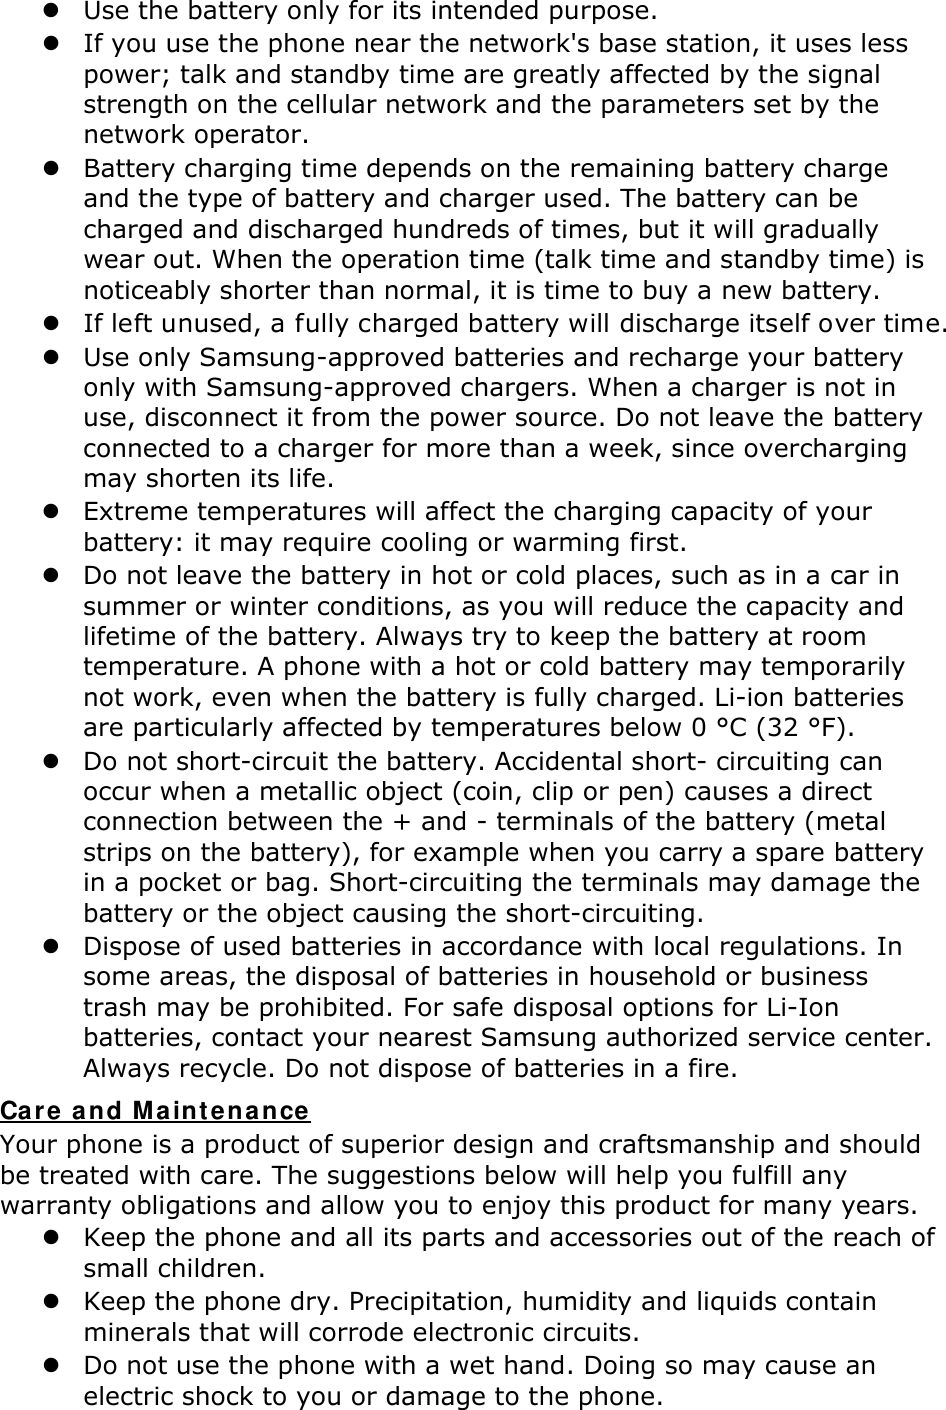  Use the battery only for its intended purpose.  If you use the phone near the network&apos;s base station, it uses less power; talk and standby time are greatly affected by the signal strength on the cellular network and the parameters set by the network operator.  Battery charging time depends on the remaining battery charge and the type of battery and charger used. The battery can be charged and discharged hundreds of times, but it will gradually wear out. When the operation time (talk time and standby time) is noticeably shorter than normal, it is time to buy a new battery.  If left unused, a fully charged battery will discharge itself over time.  Use only Samsung-approved batteries and recharge your battery only with Samsung-approved chargers. When a charger is not in use, disconnect it from the power source. Do not leave the battery connected to a charger for more than a week, since overcharging may shorten its life.  Extreme temperatures will affect the charging capacity of your battery: it may require cooling or warming first.  Do not leave the battery in hot or cold places, such as in a car in summer or winter conditions, as you will reduce the capacity and lifetime of the battery. Always try to keep the battery at room temperature. A phone with a hot or cold battery may temporarily not work, even when the battery is fully charged. Li-ion batteries are particularly affected by temperatures below 0 °C (32 °F).  Do not short-circuit the battery. Accidental short- circuiting can occur when a metallic object (coin, clip or pen) causes a direct connection between the + and - terminals of the battery (metal strips on the battery), for example when you carry a spare battery in a pocket or bag. Short-circuiting the terminals may damage the battery or the object causing the short-circuiting.  Dispose of used batteries in accordance with local regulations. In some areas, the disposal of batteries in household or business trash may be prohibited. For safe disposal options for Li-Ion batteries, contact your nearest Samsung authorized service center. Always recycle. Do not dispose of batteries in a fire. Your phone is a product of superior design and craftsmanship and should be treated with care. The suggestions below will help you fulfill any warranty obligations and allow you to enjoy this product for many years. Care and Maintenance  Keep the phone and all its parts and accessories out of the reach of small children.  Keep the phone dry. Precipitation, humidity and liquids contain minerals that will corrode electronic circuits.  Do not use the phone with a wet hand. Doing so may cause an electric shock to you or damage to the phone. 